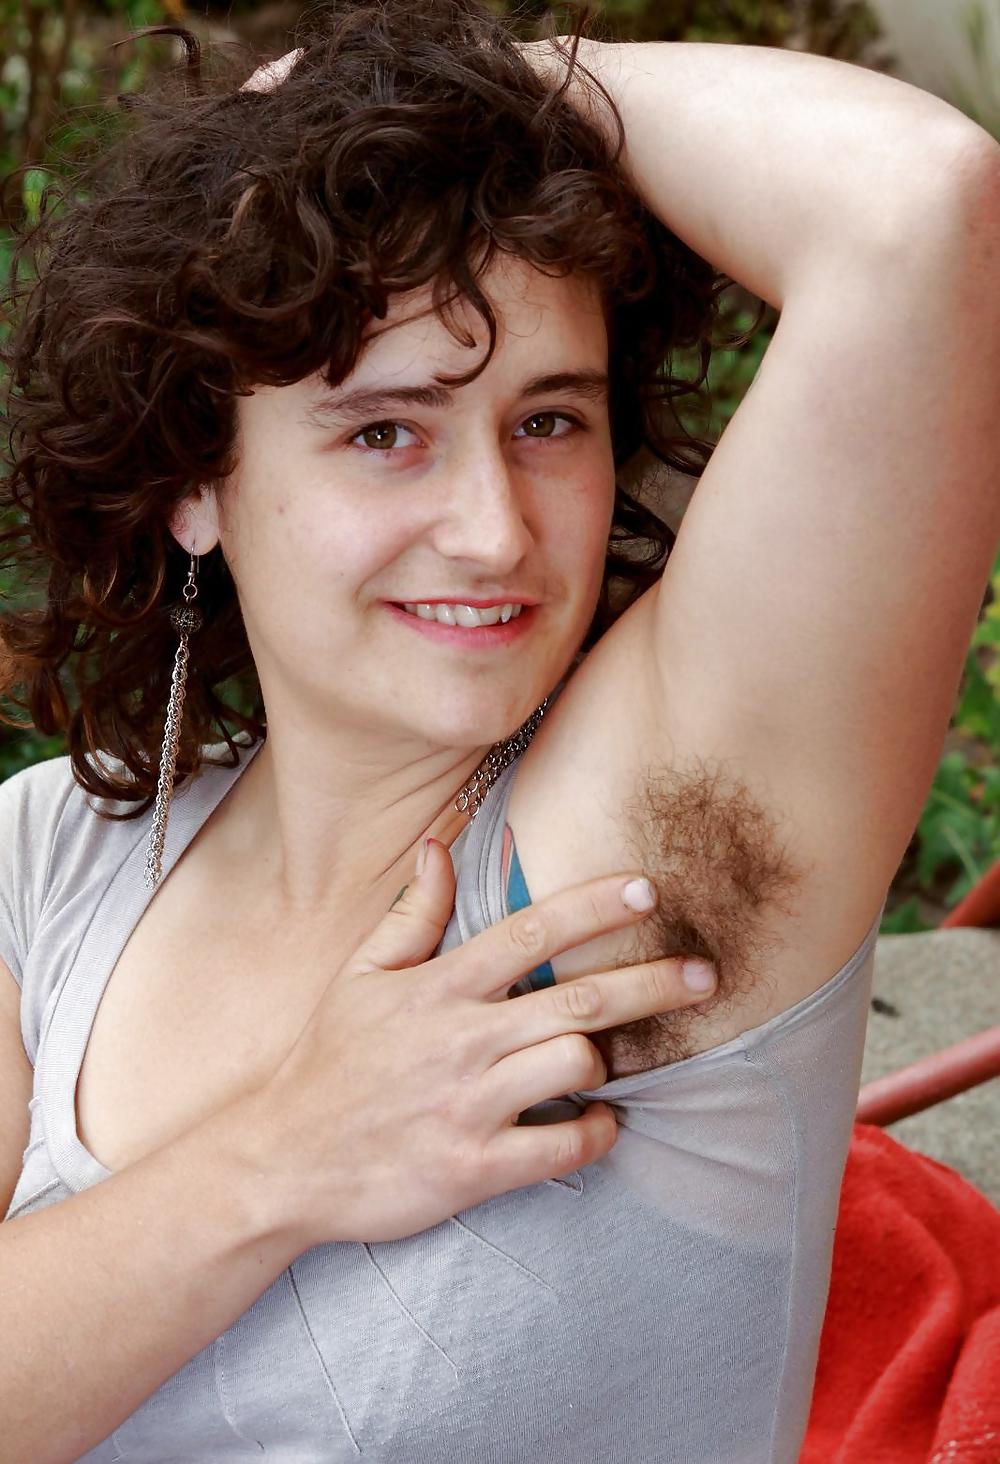 Miscellaneous girls showing hairy, unshaven armpits 2 #36246626